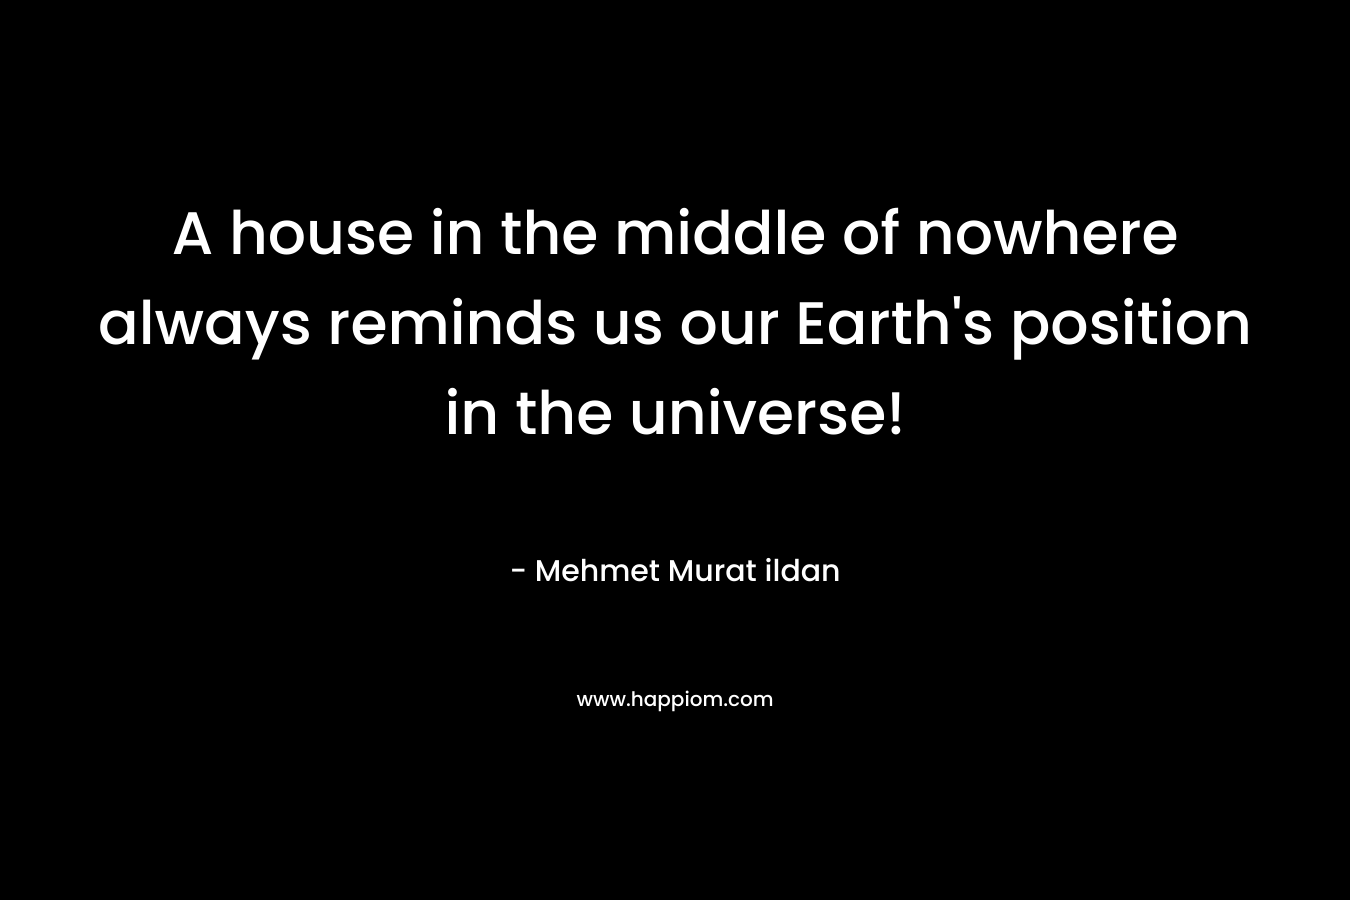 A house in the middle of nowhere always reminds us our Earth’s position in the universe! – Mehmet Murat ildan